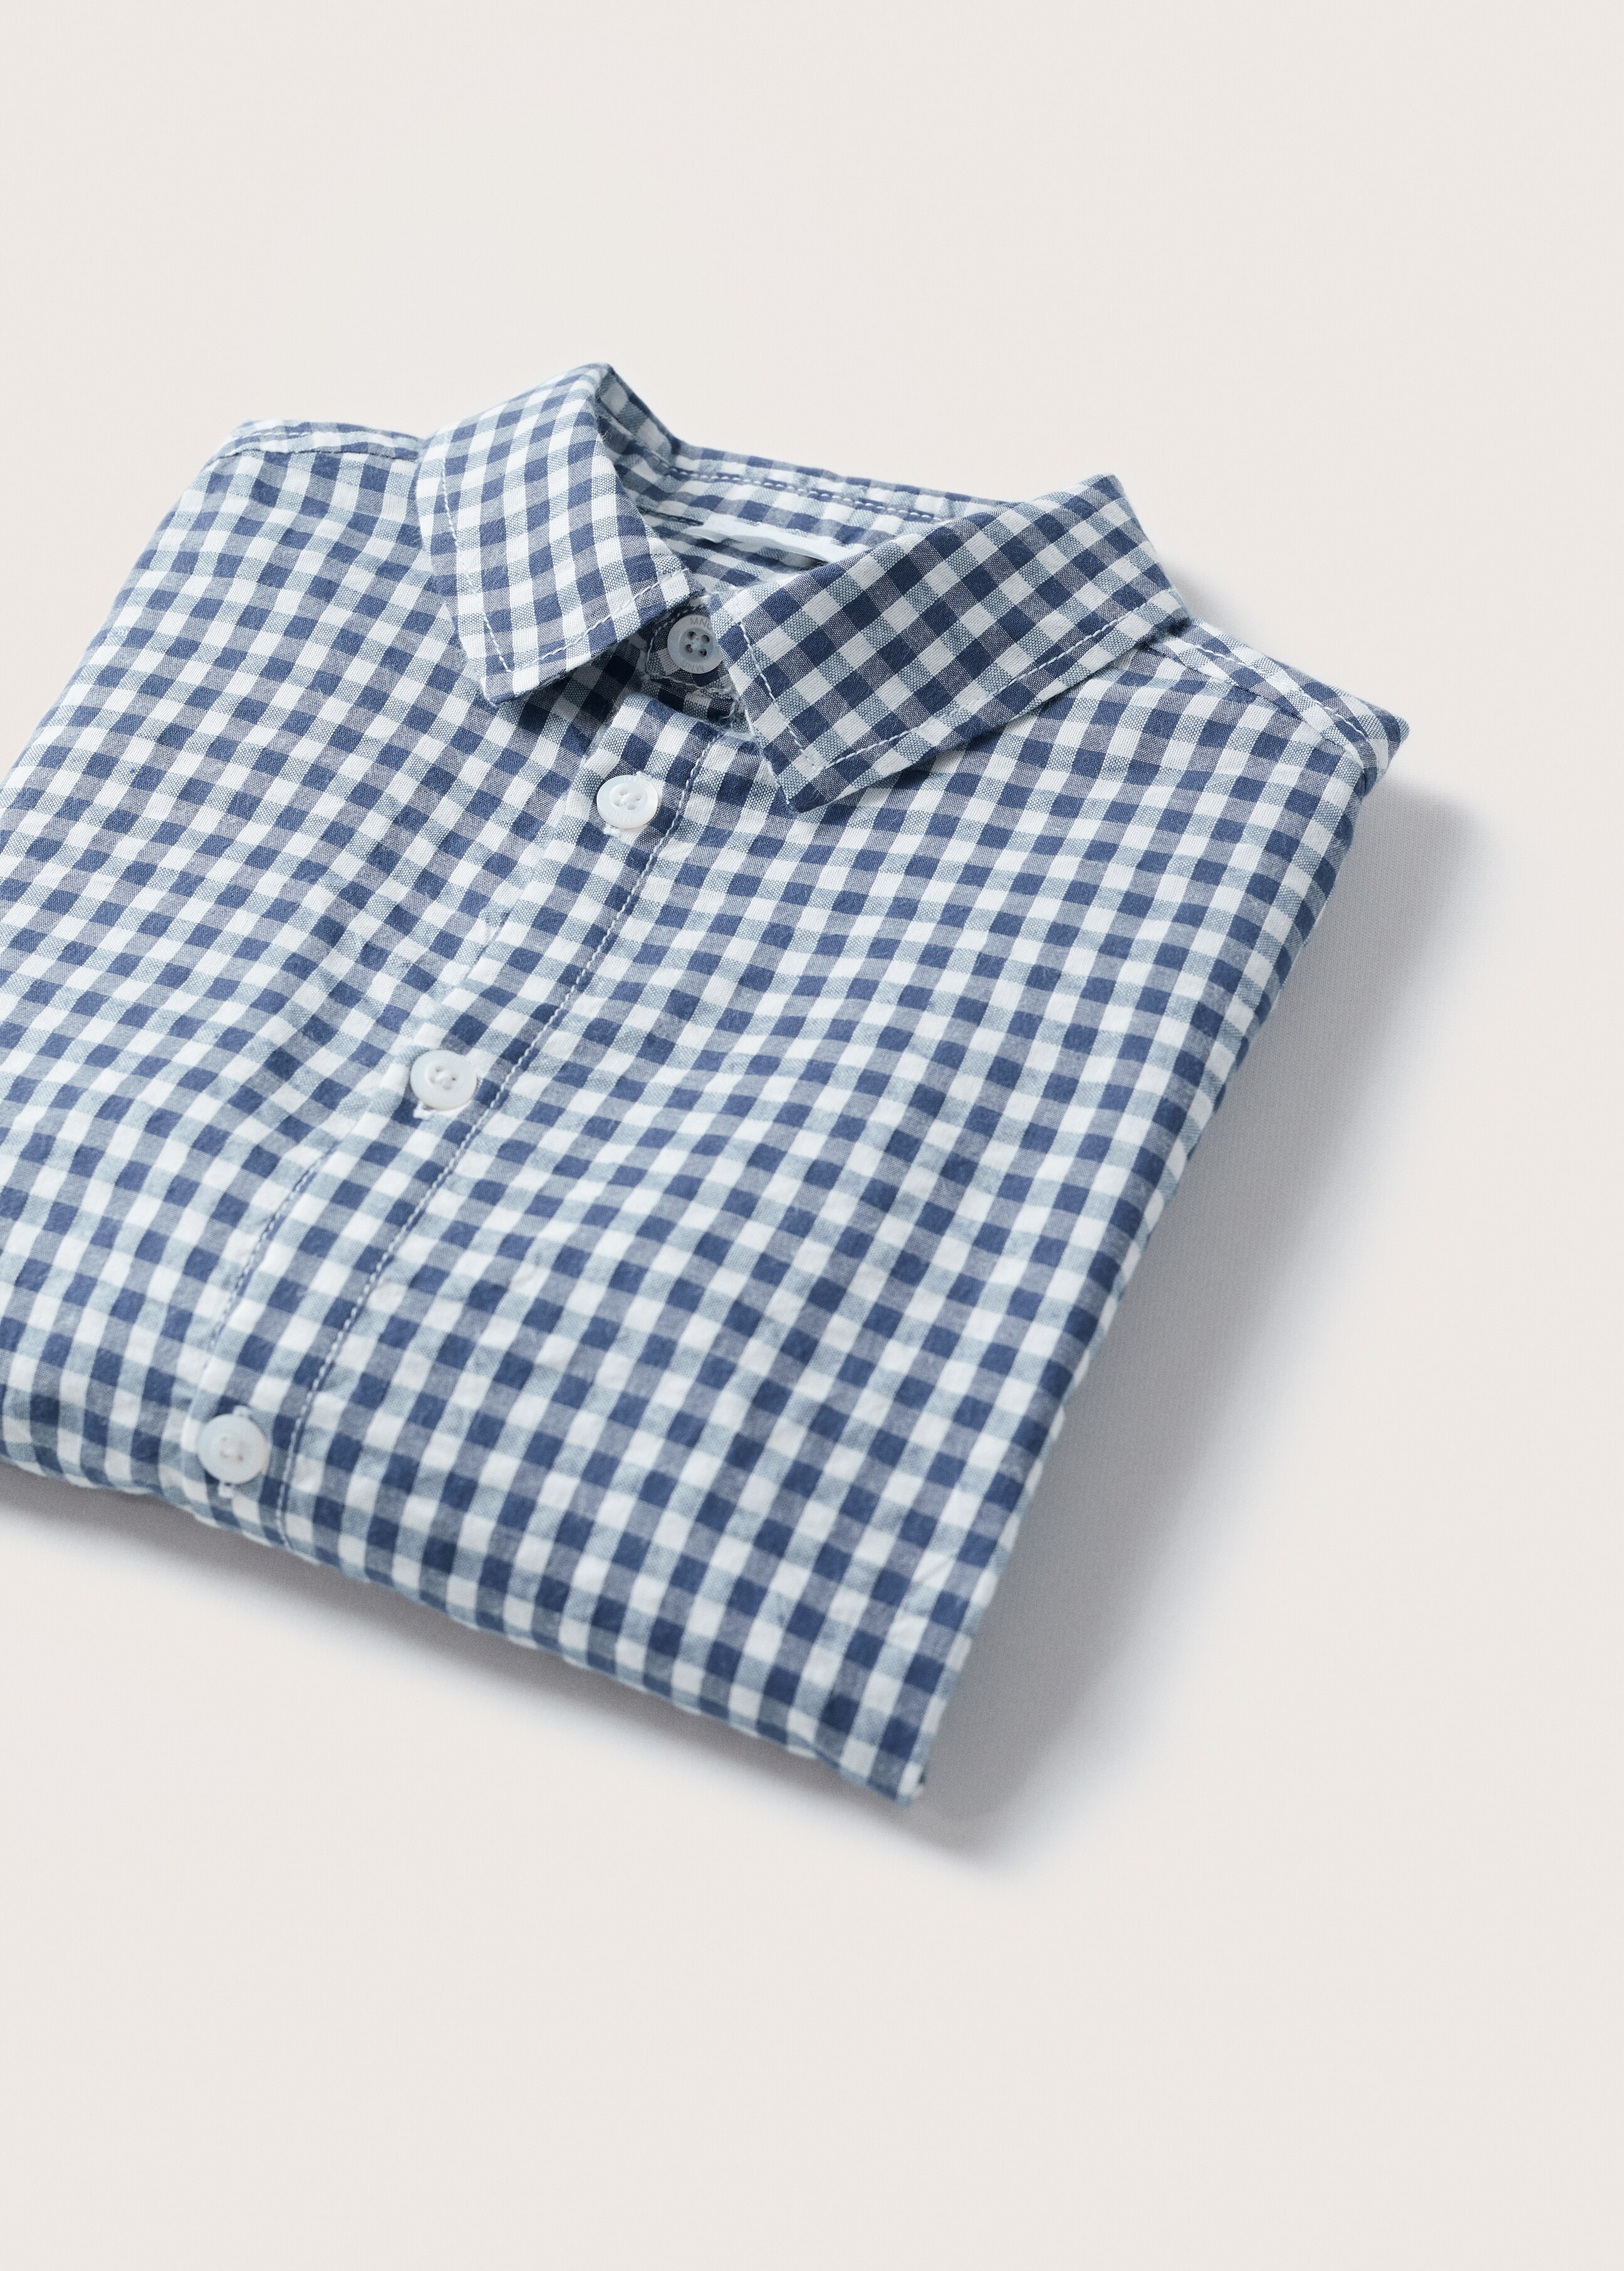 Gingham check shirt - Details of the article 8